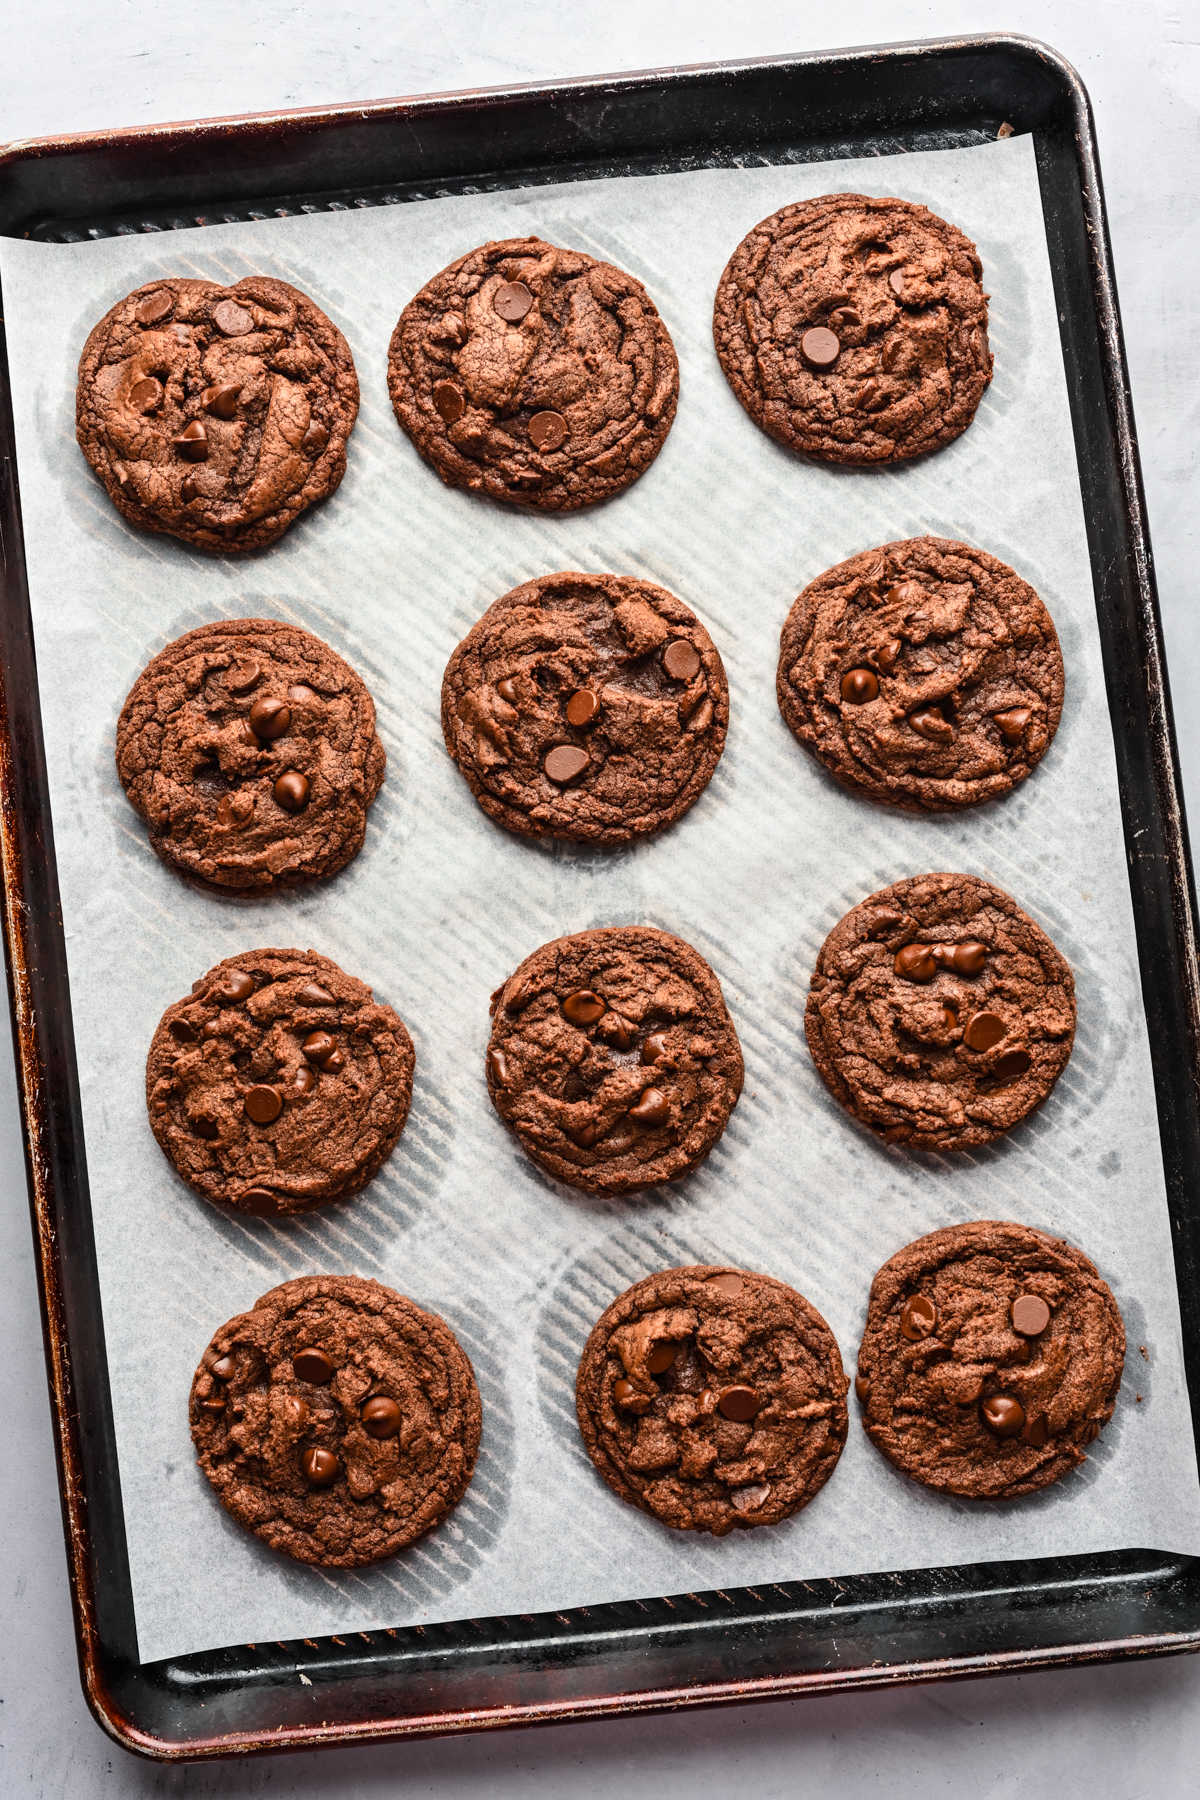 A dozen baked Nutella cookies on a cookie sheet.